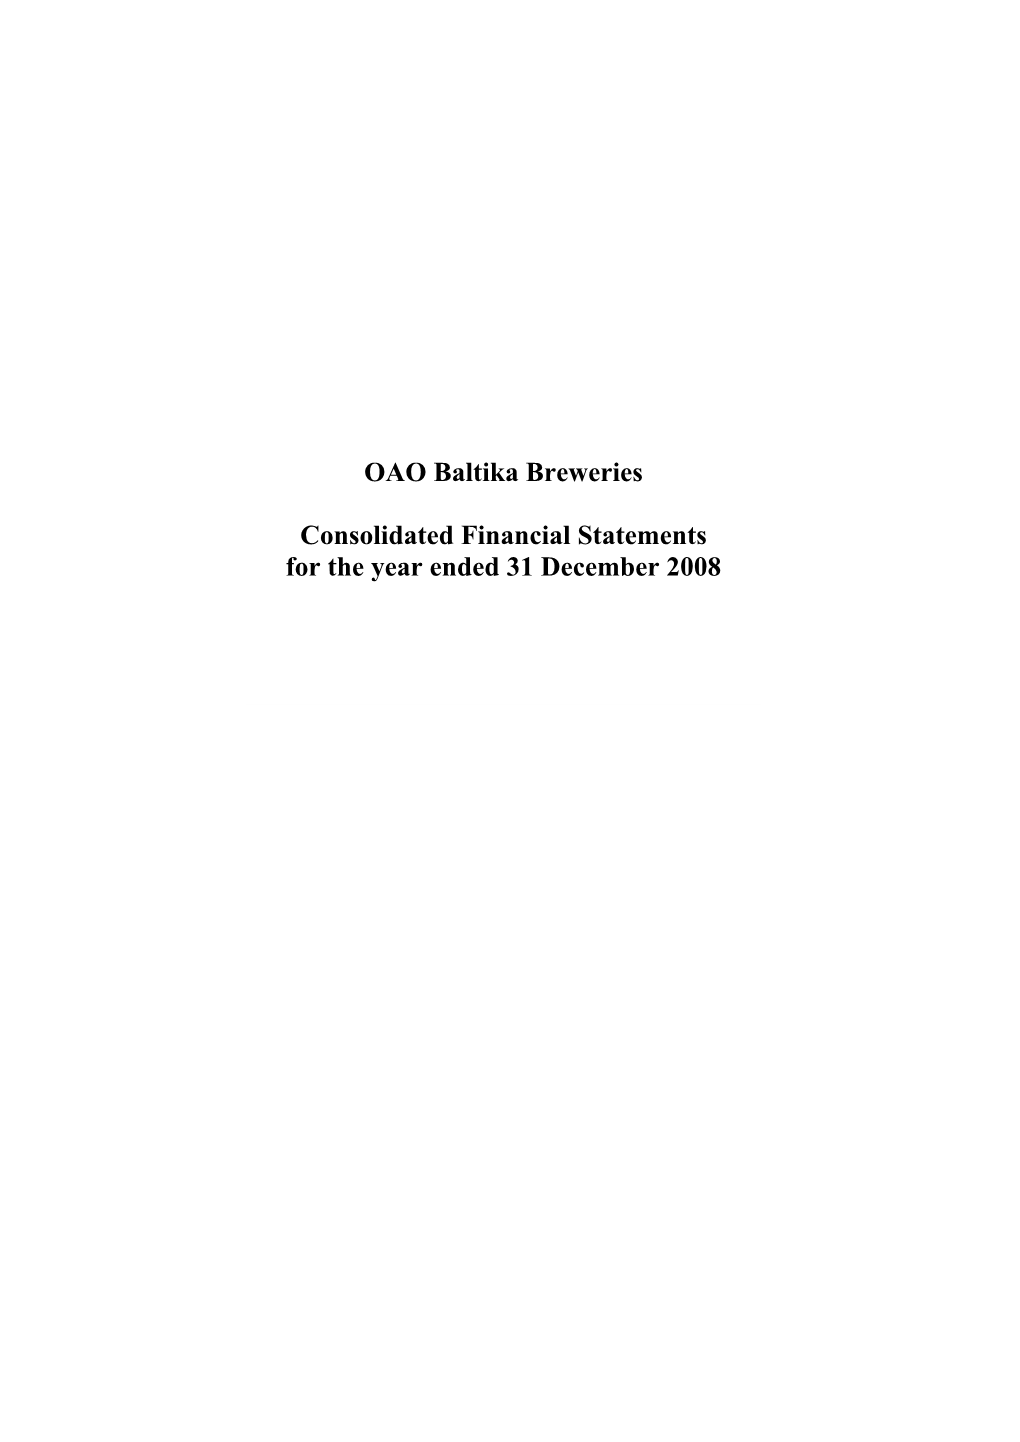 OAO Baltika Breweries Consolidated Financial